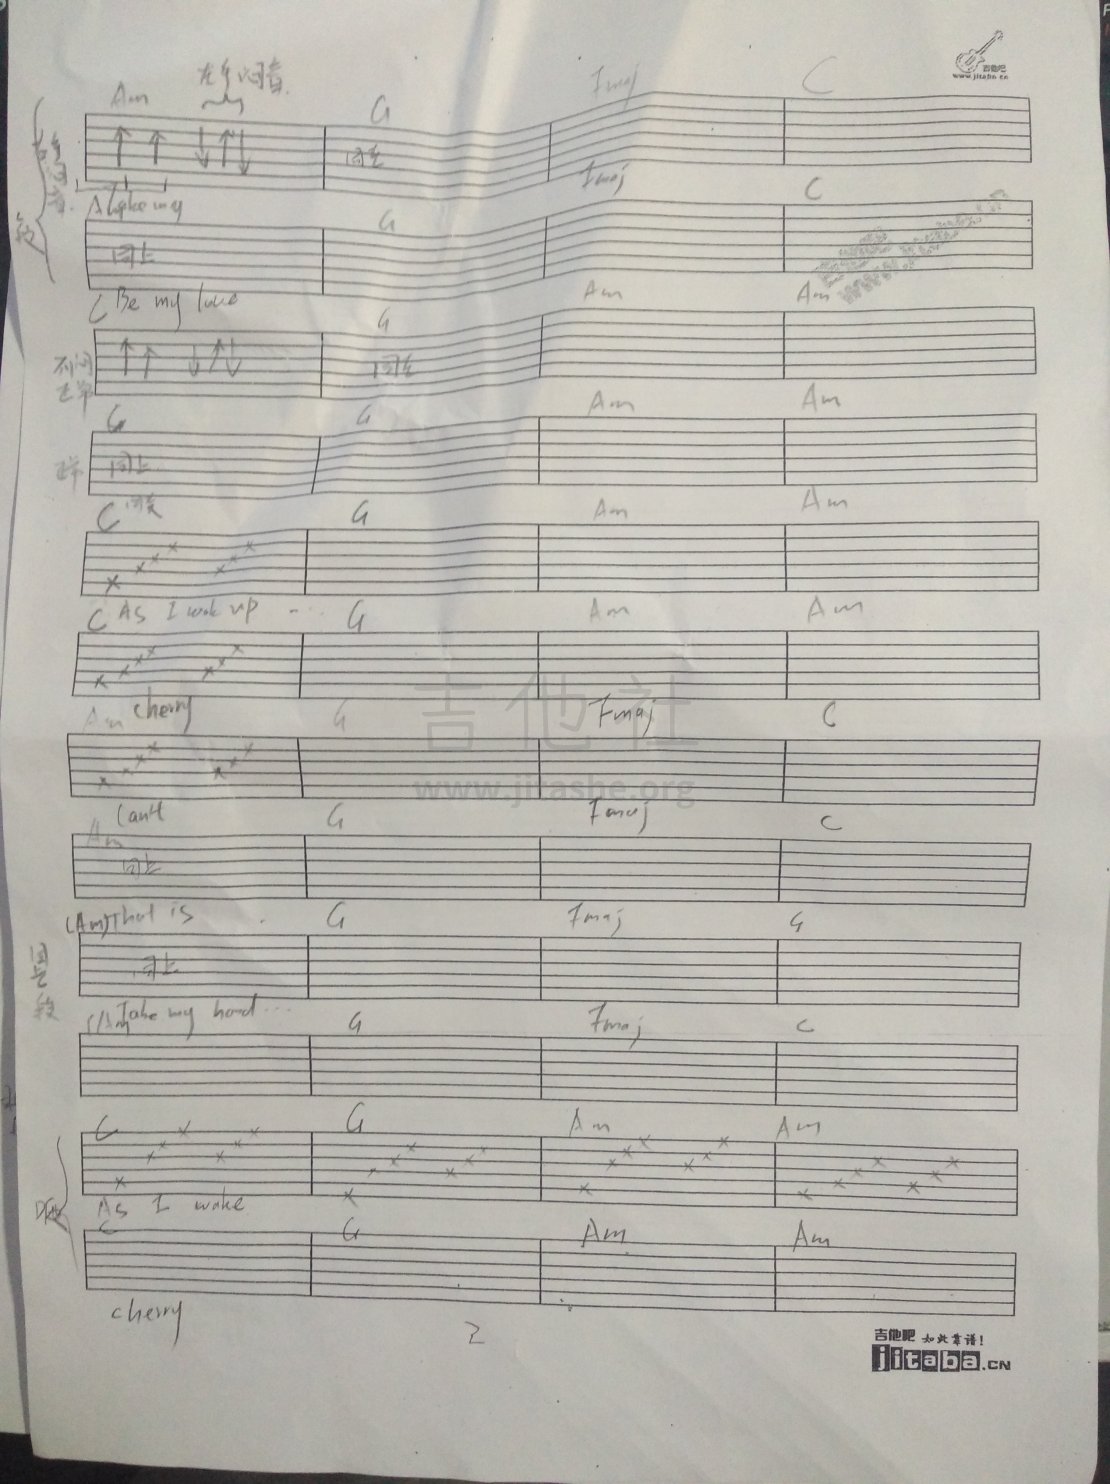 Akon - Hold My Hand sheet music for voice, piano or guitar [PDF]